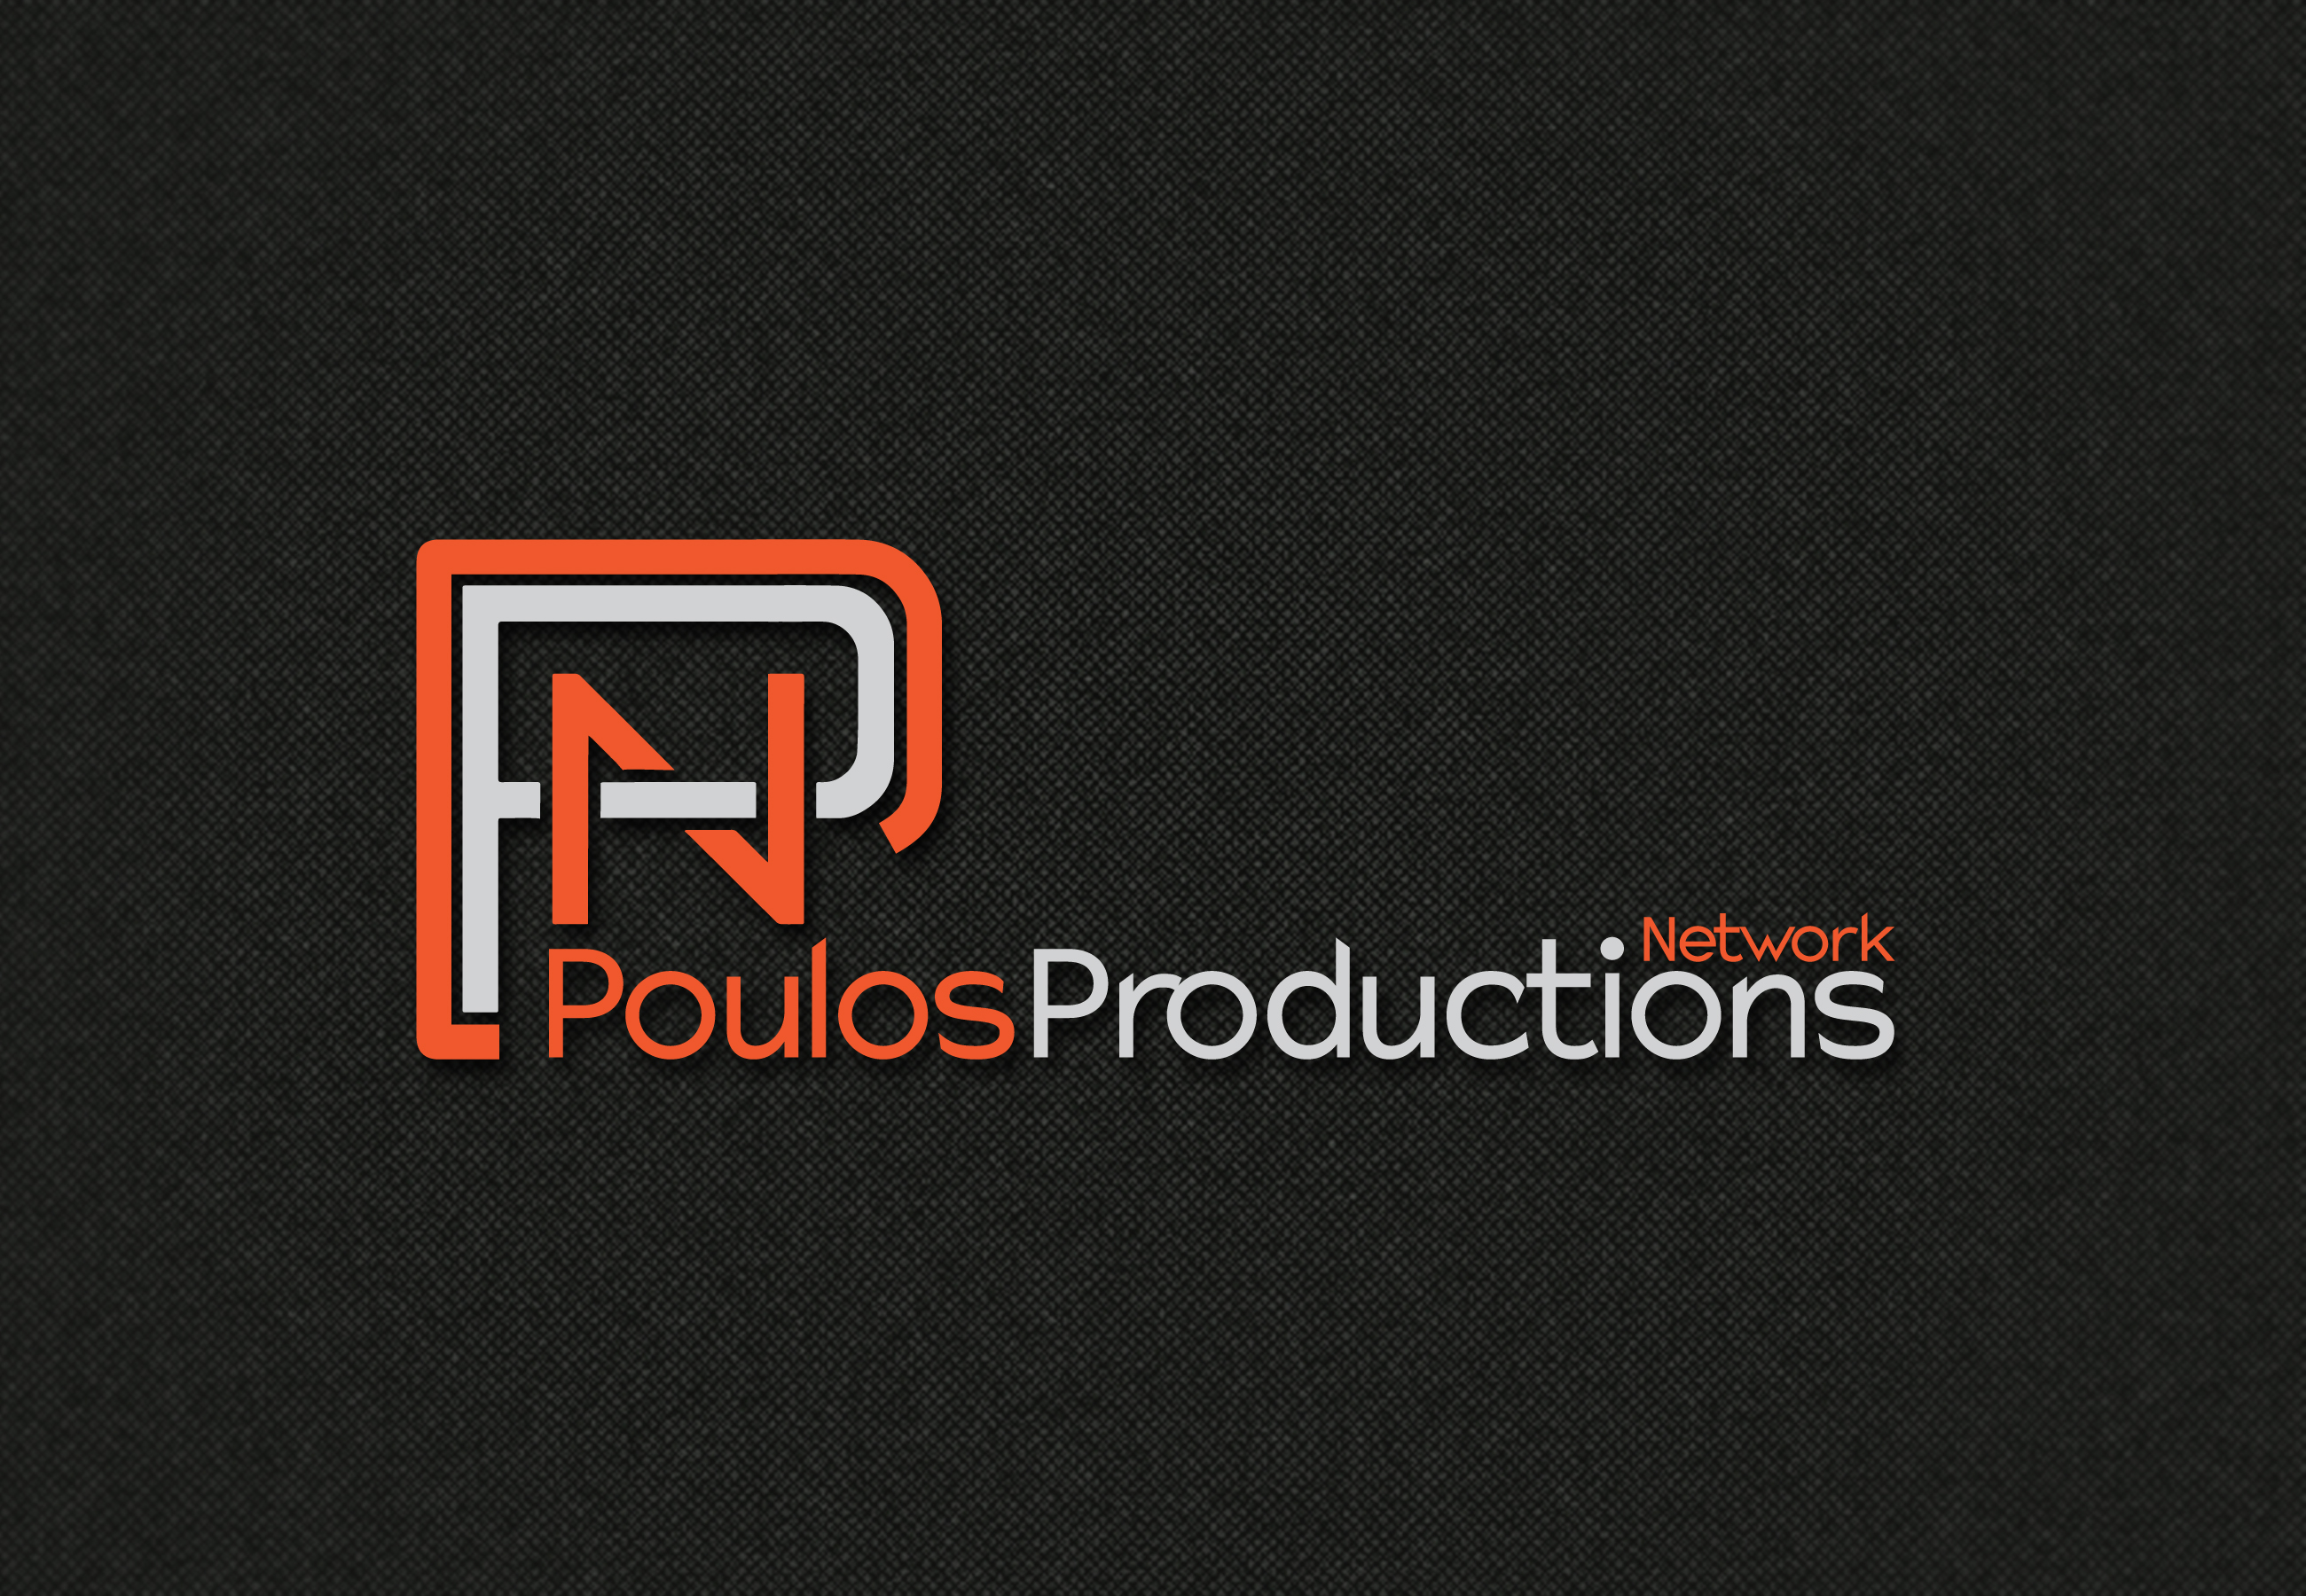 Poulos Productions LLC